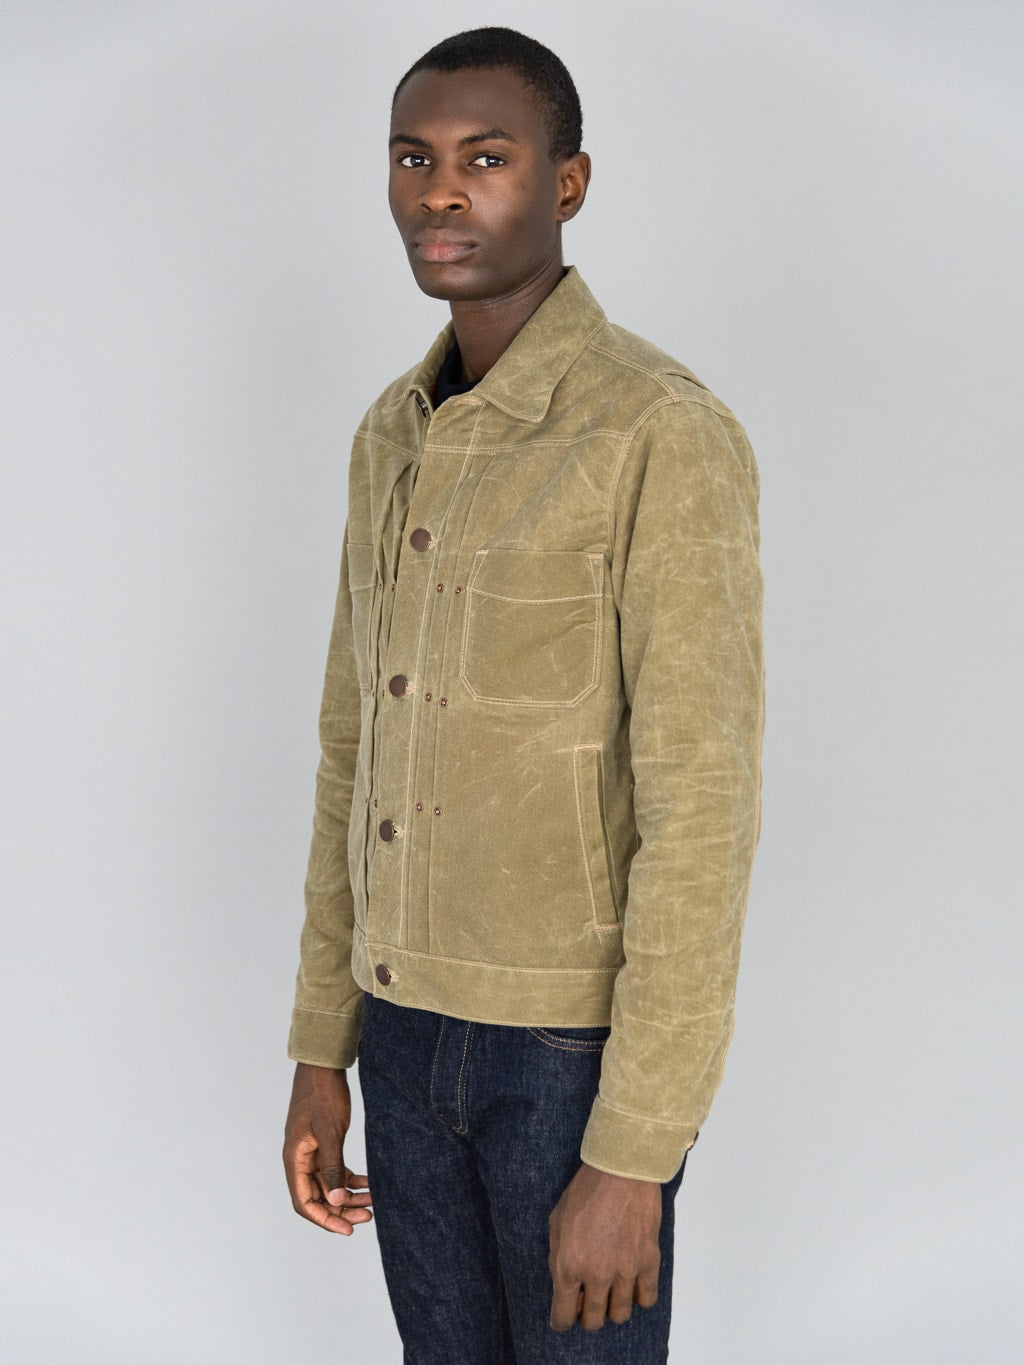 Freenote Cloth Riders Jacket Waxed Canvas Tobacco model side fit